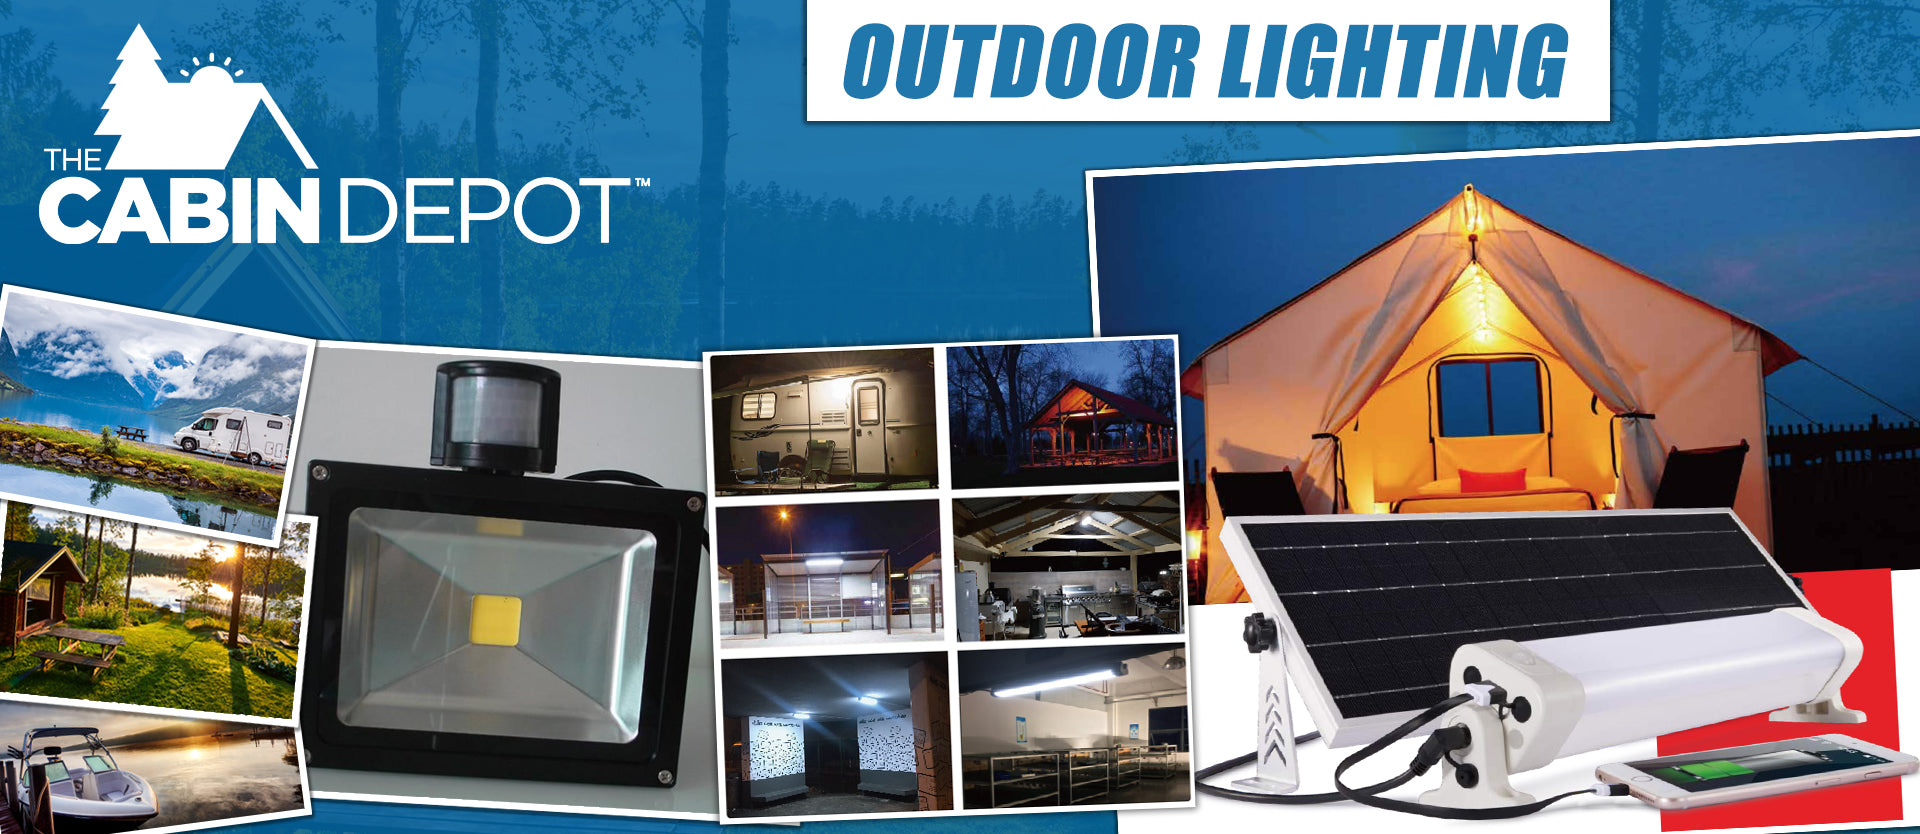 Outdoor Lighting Off Grid The Cabin Depot ™ Canada